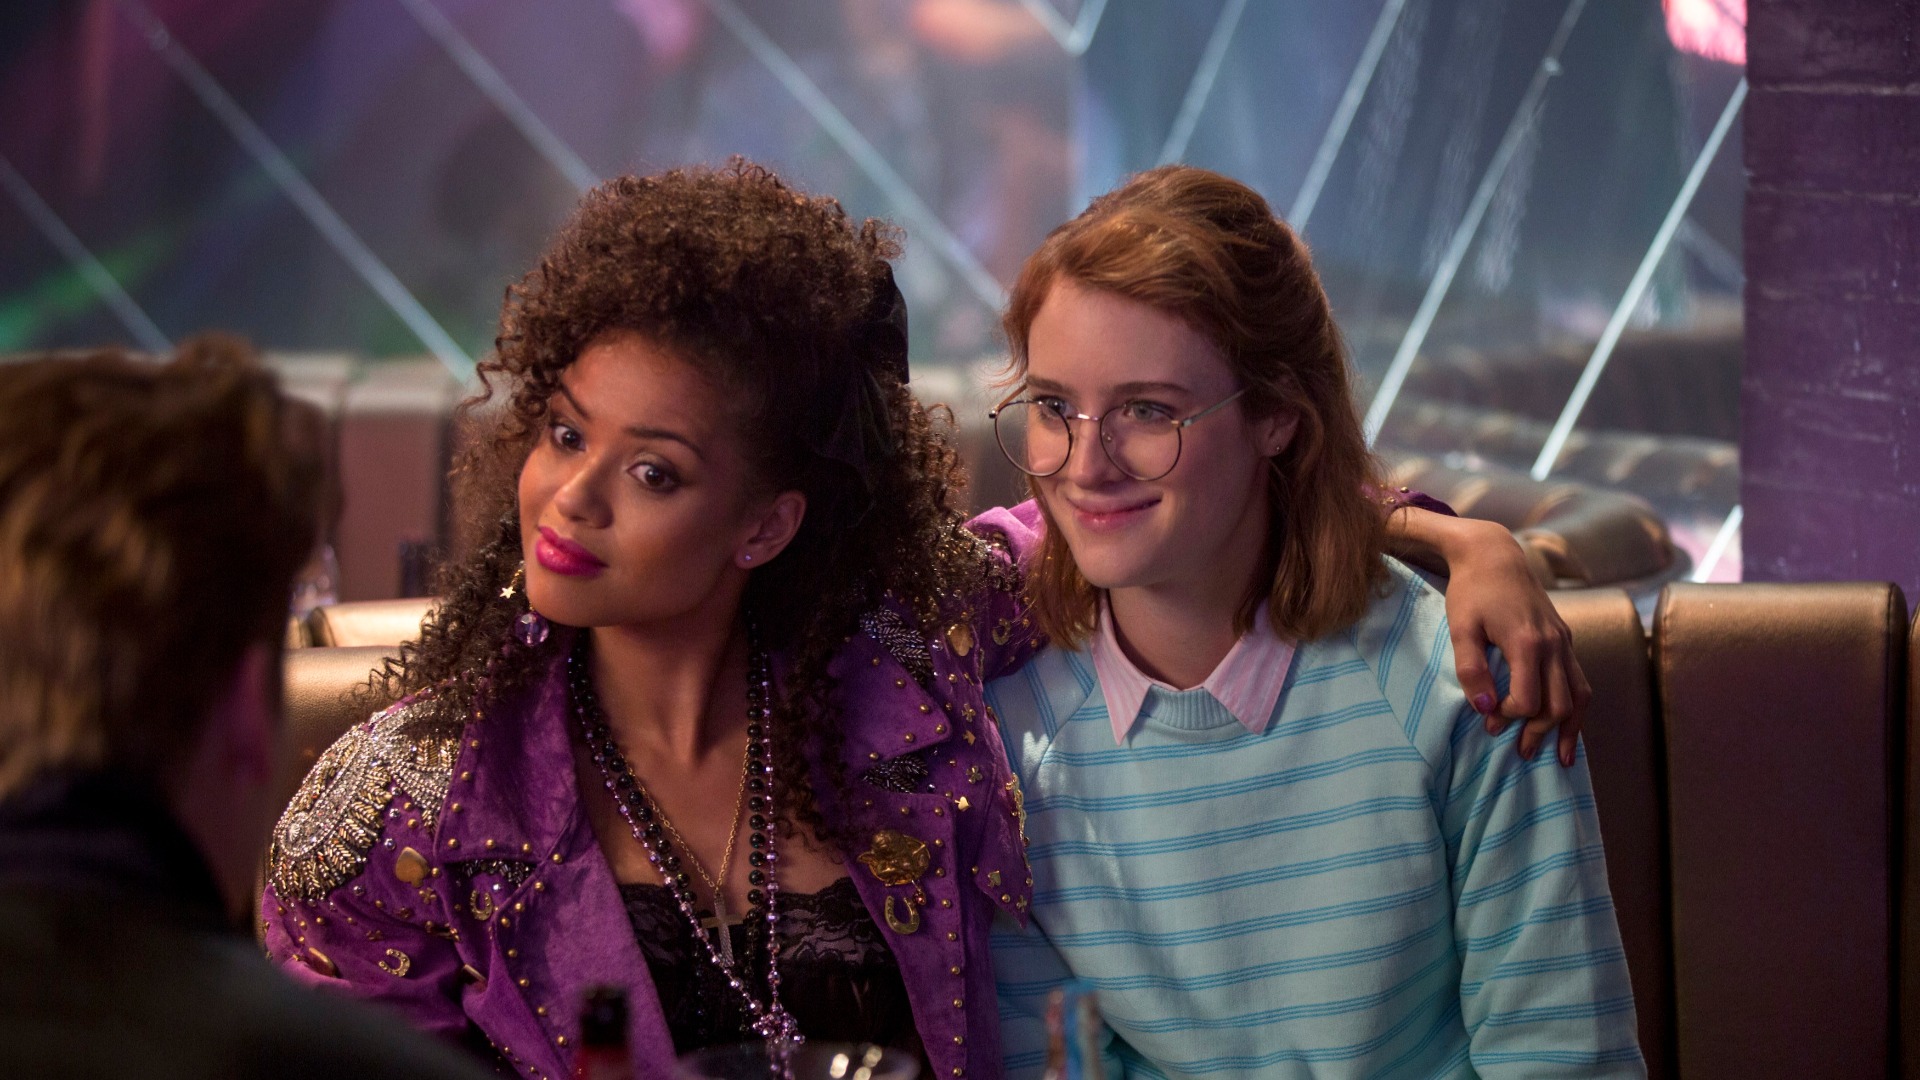 Black Mirror – one of the best Netflix shows you can watch right now